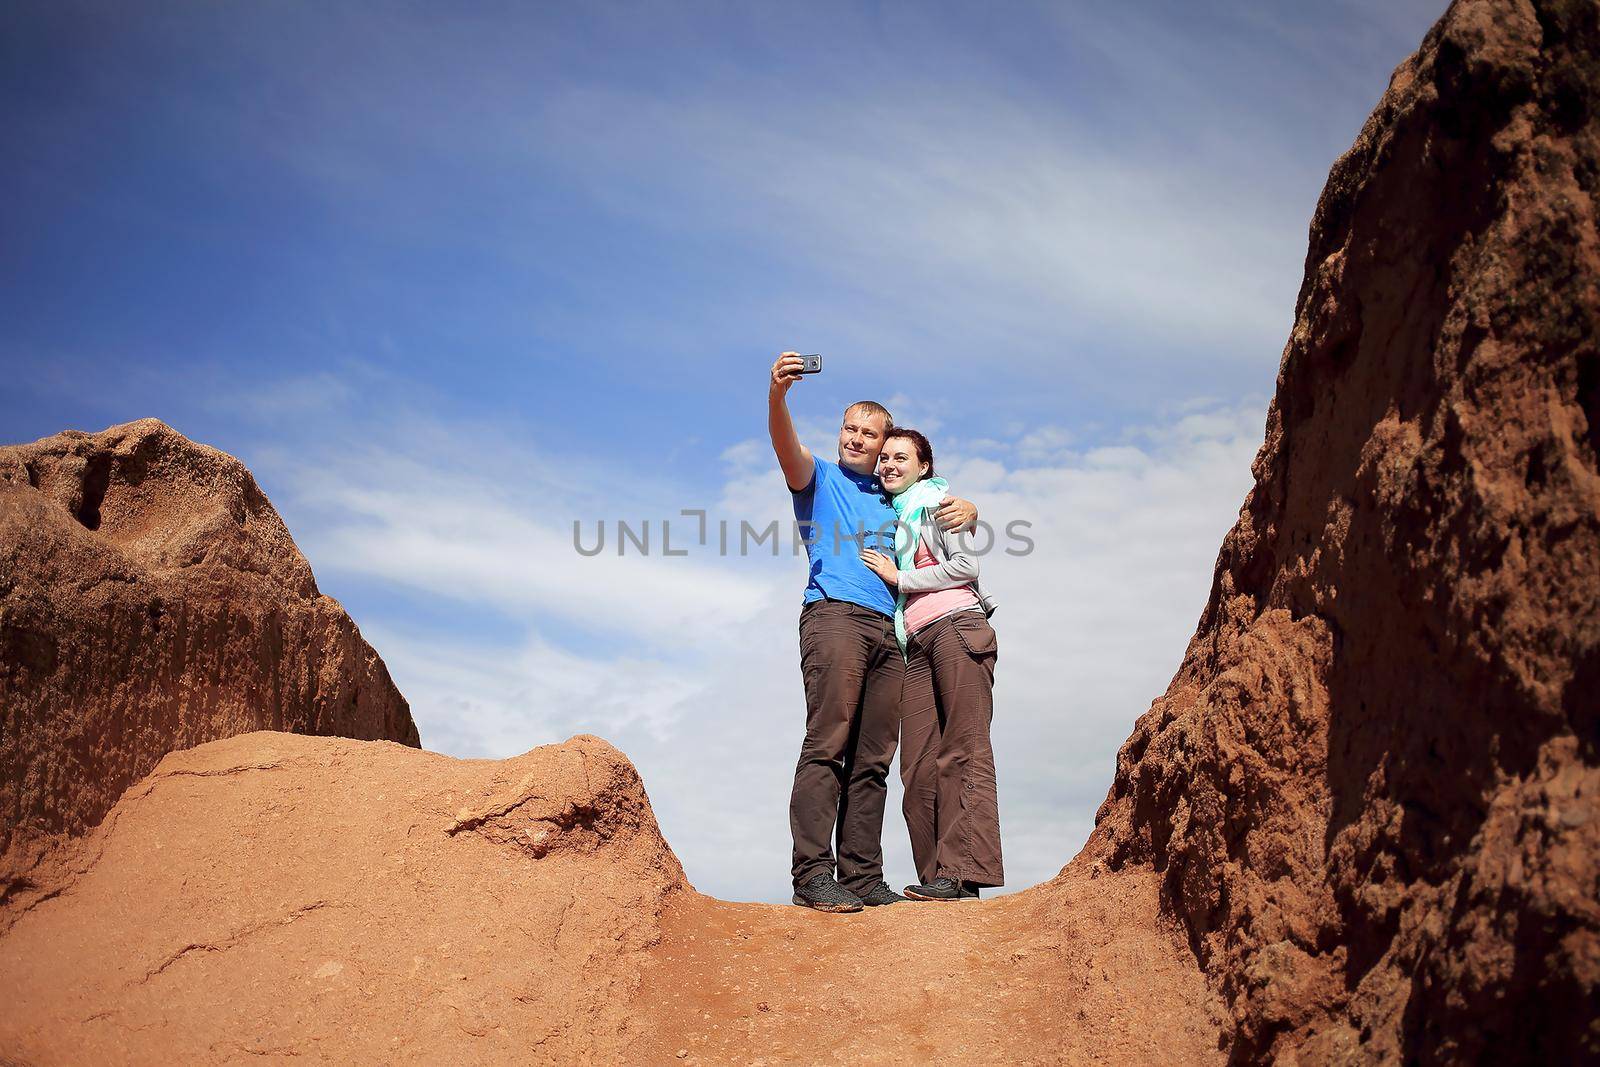 A guy and a girl take a selfie while on the top of the mountain against the background of the sky.